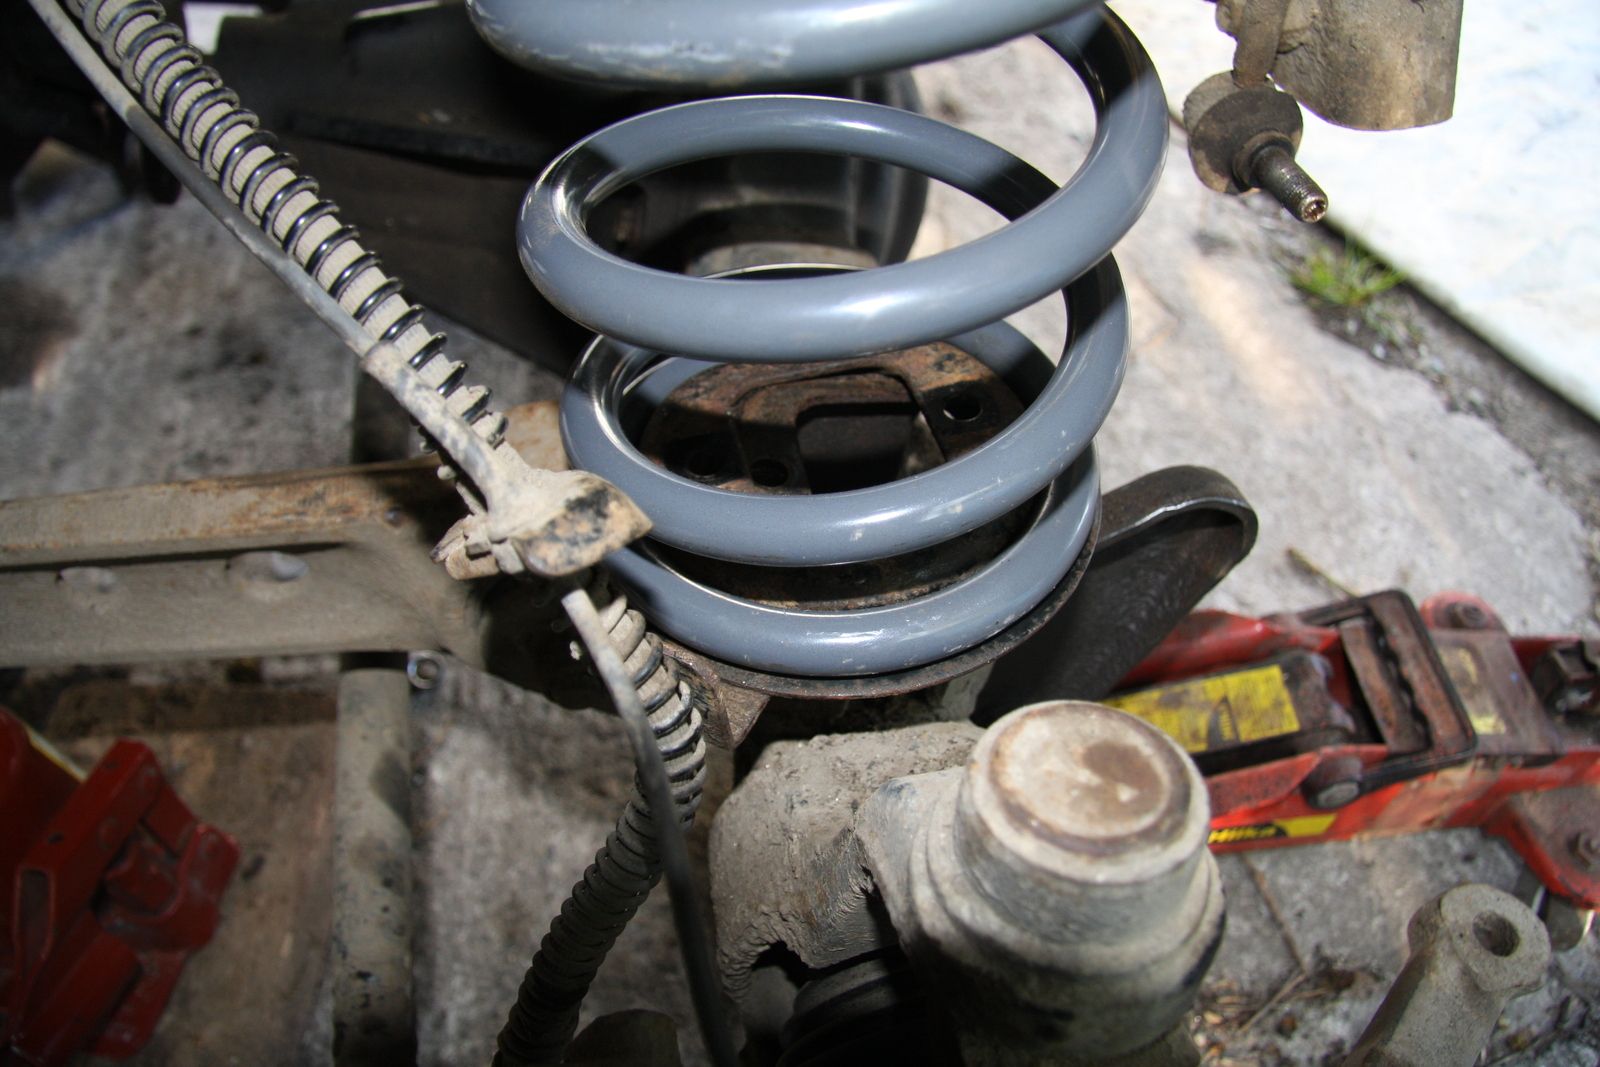 Discovery 2 front coil spring | LandyZone - Land Rover Forum